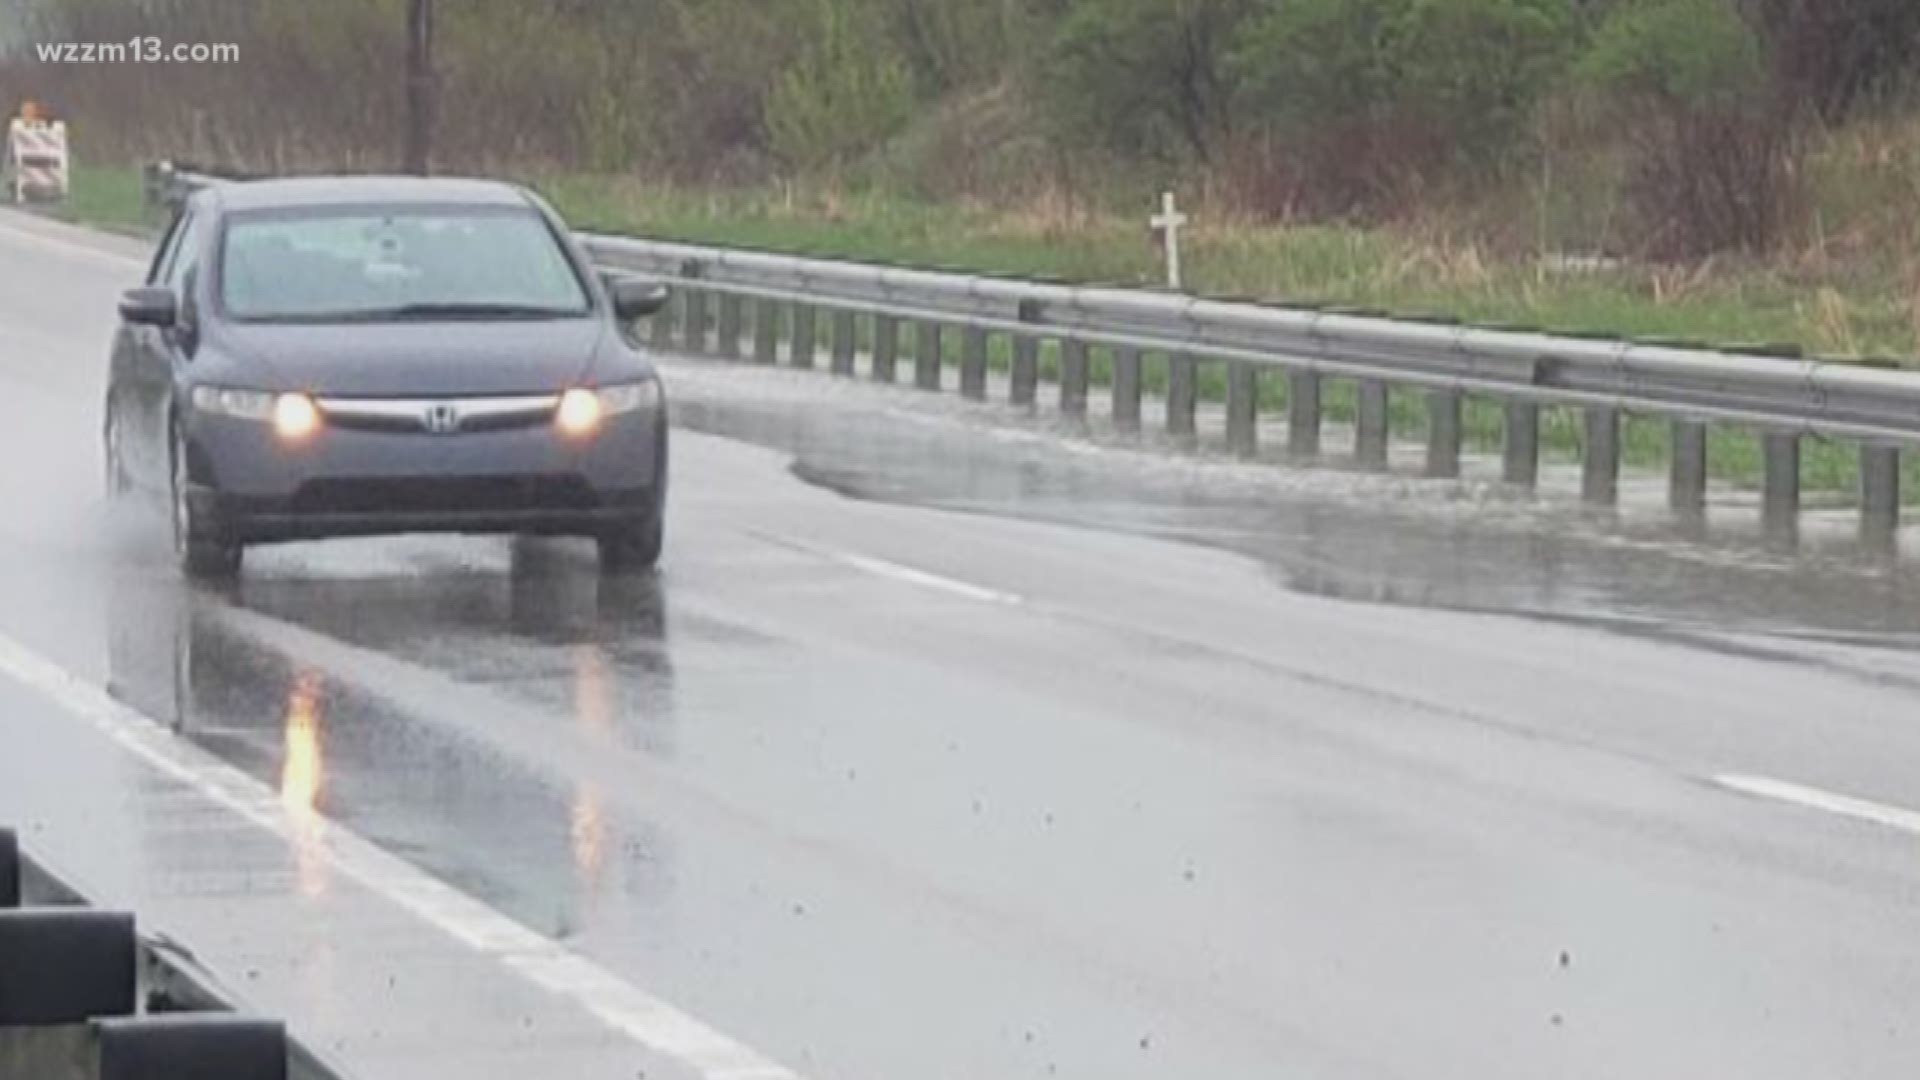 Authorities say drivers should slow down and never drive through a flooded roadway.